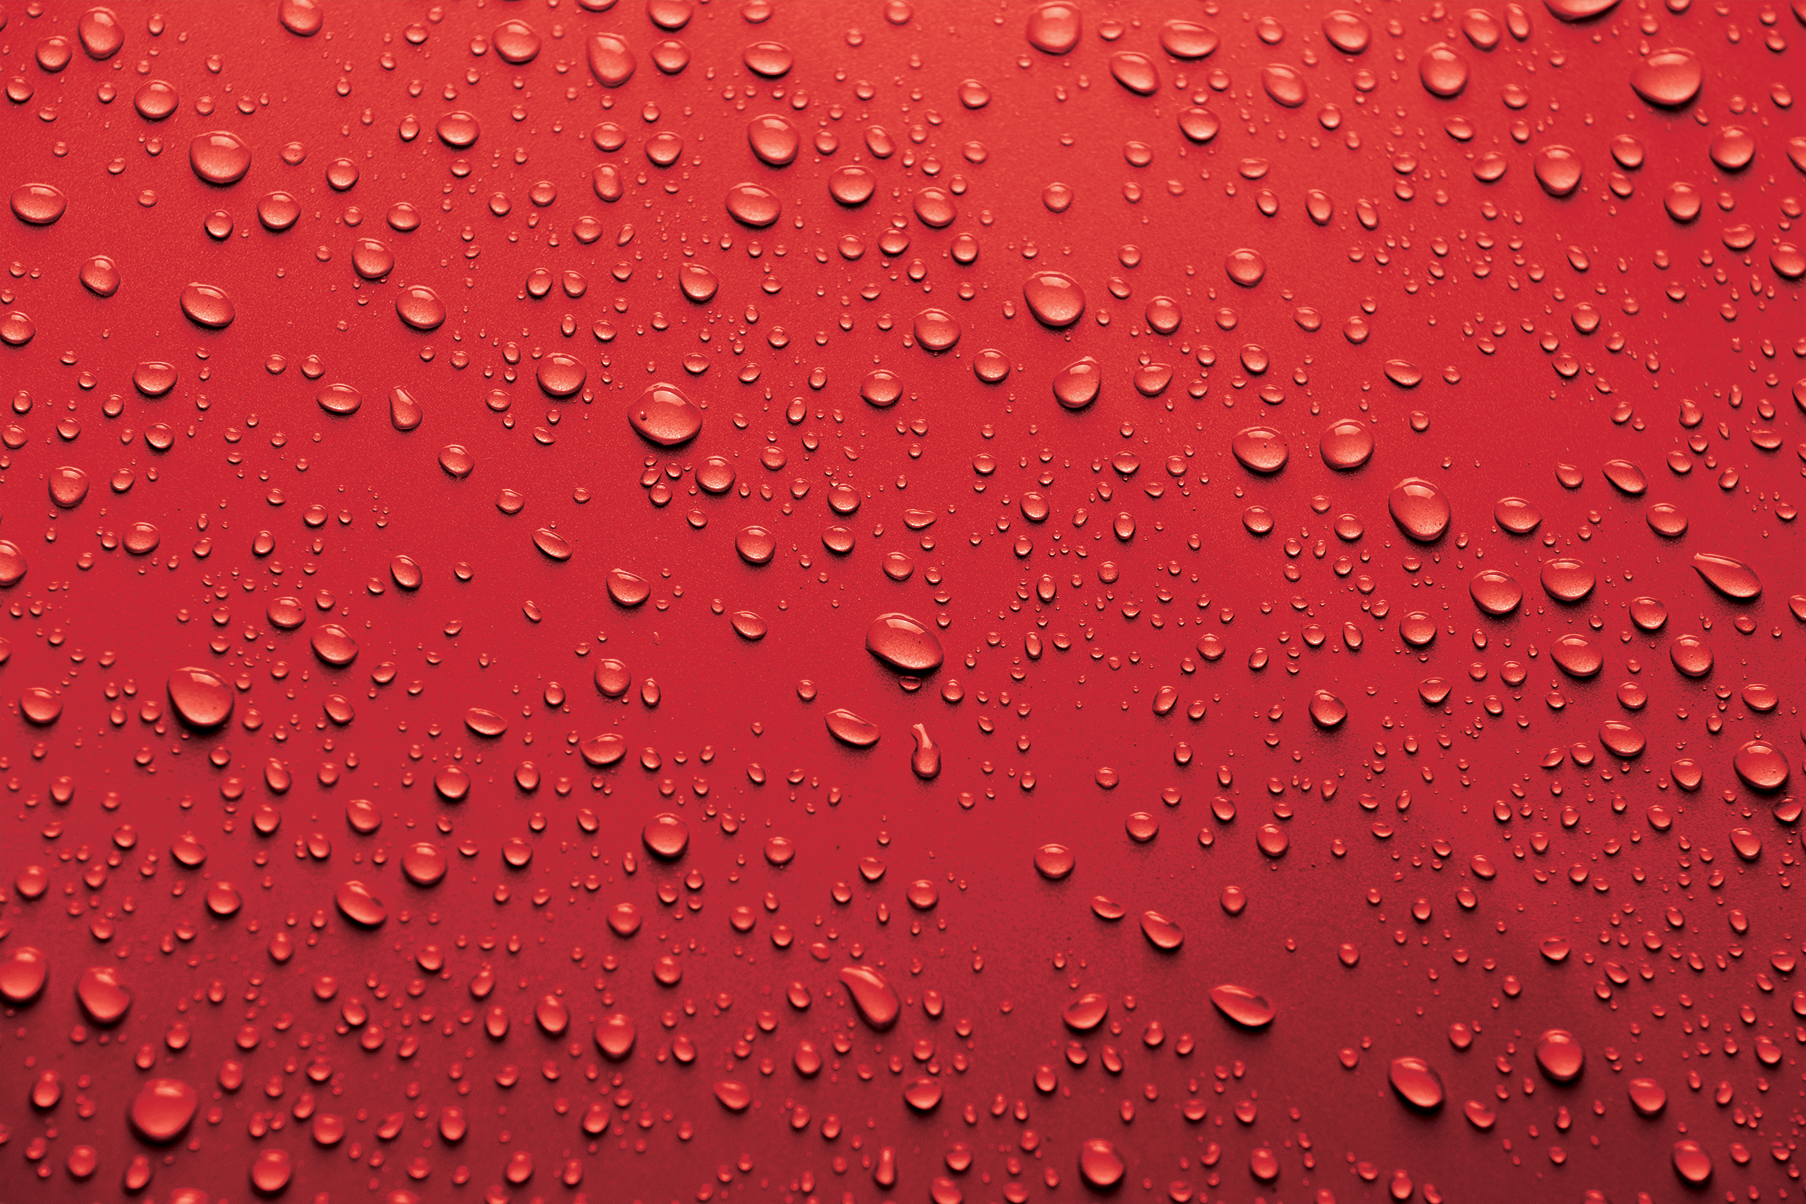 water beading on red paint